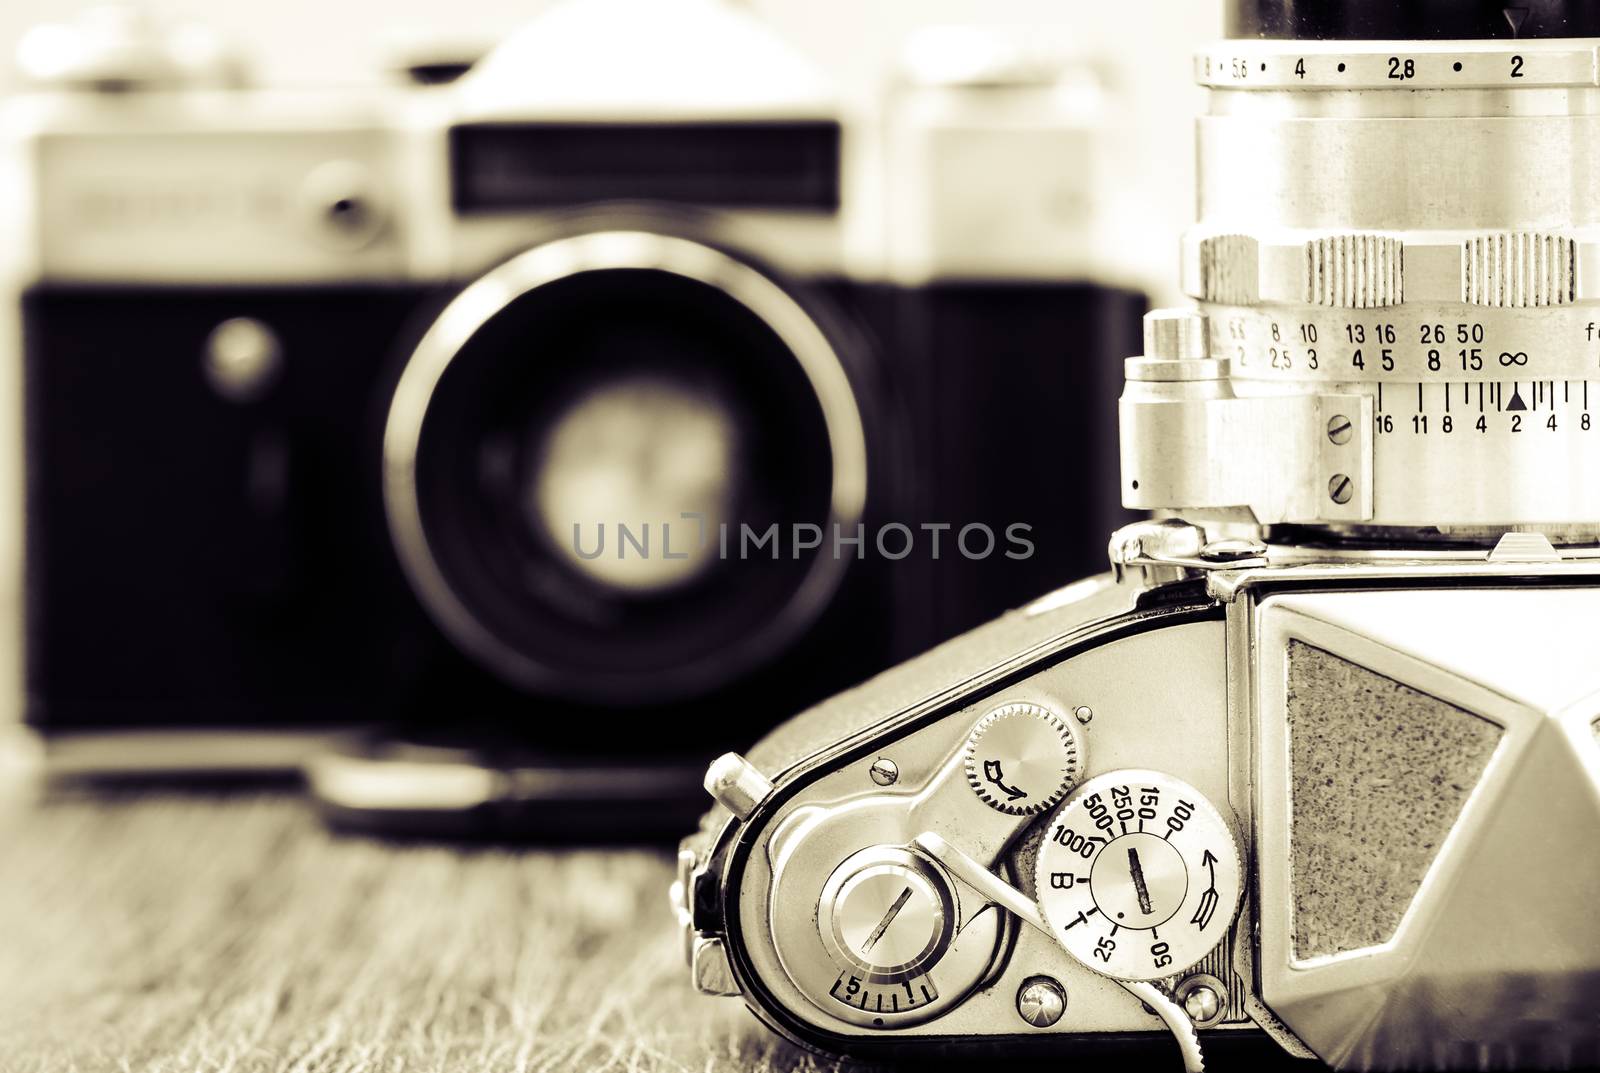 Detail view of classic cameras in monochrome by martinm303